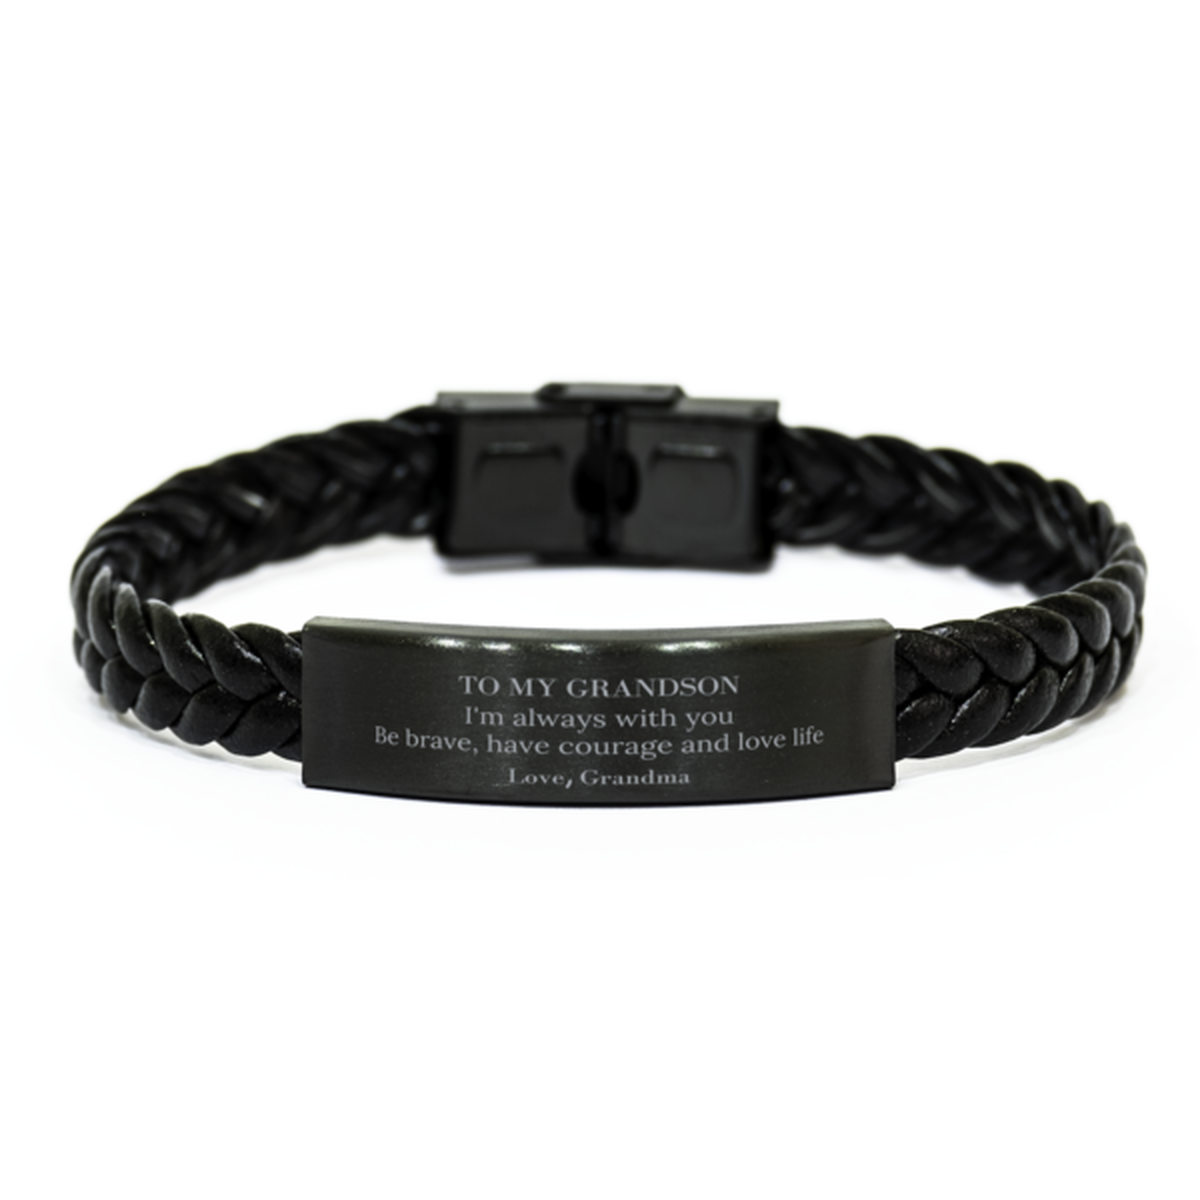 To My Grandson Gifts from Grandma, Unique Braided Leather Bracelet Inspirational Christmas Birthday Graduation Gifts for Grandson I'm always with you. Be brave, have courage and love life. Love, Grandma